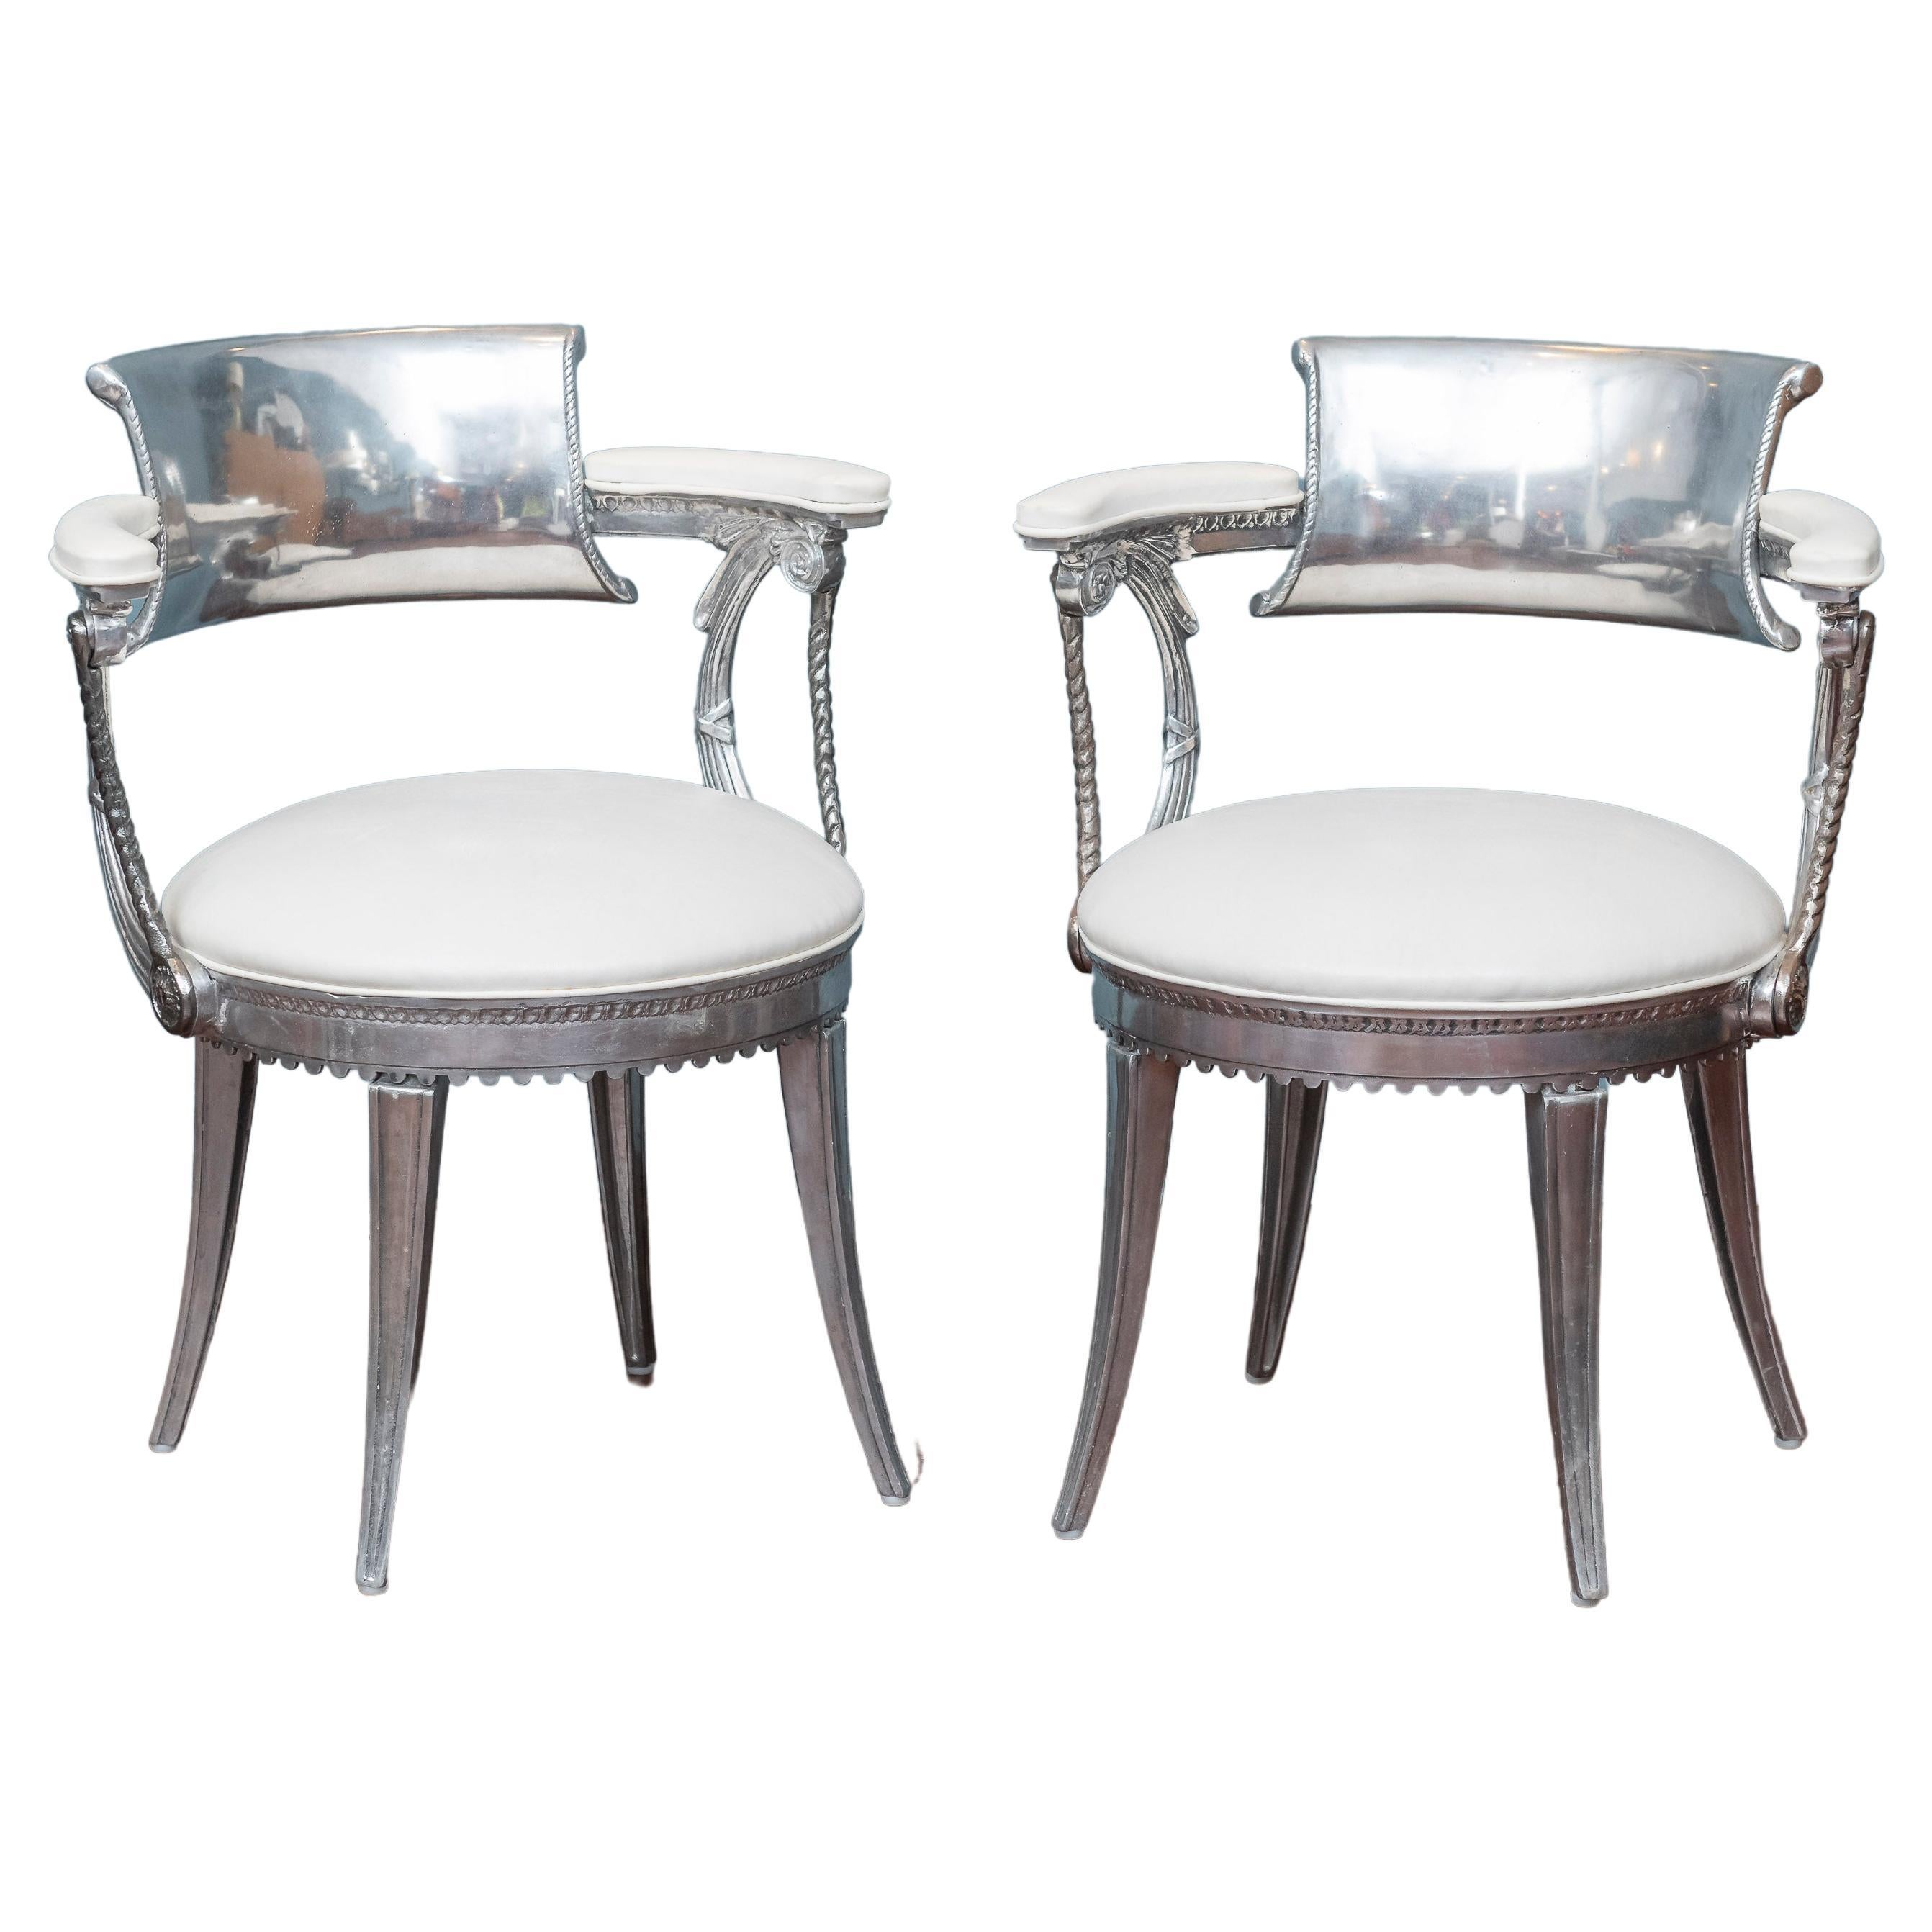 Dorothy Draper Armchairs for the Fairmont Hotel Crown Dining Room